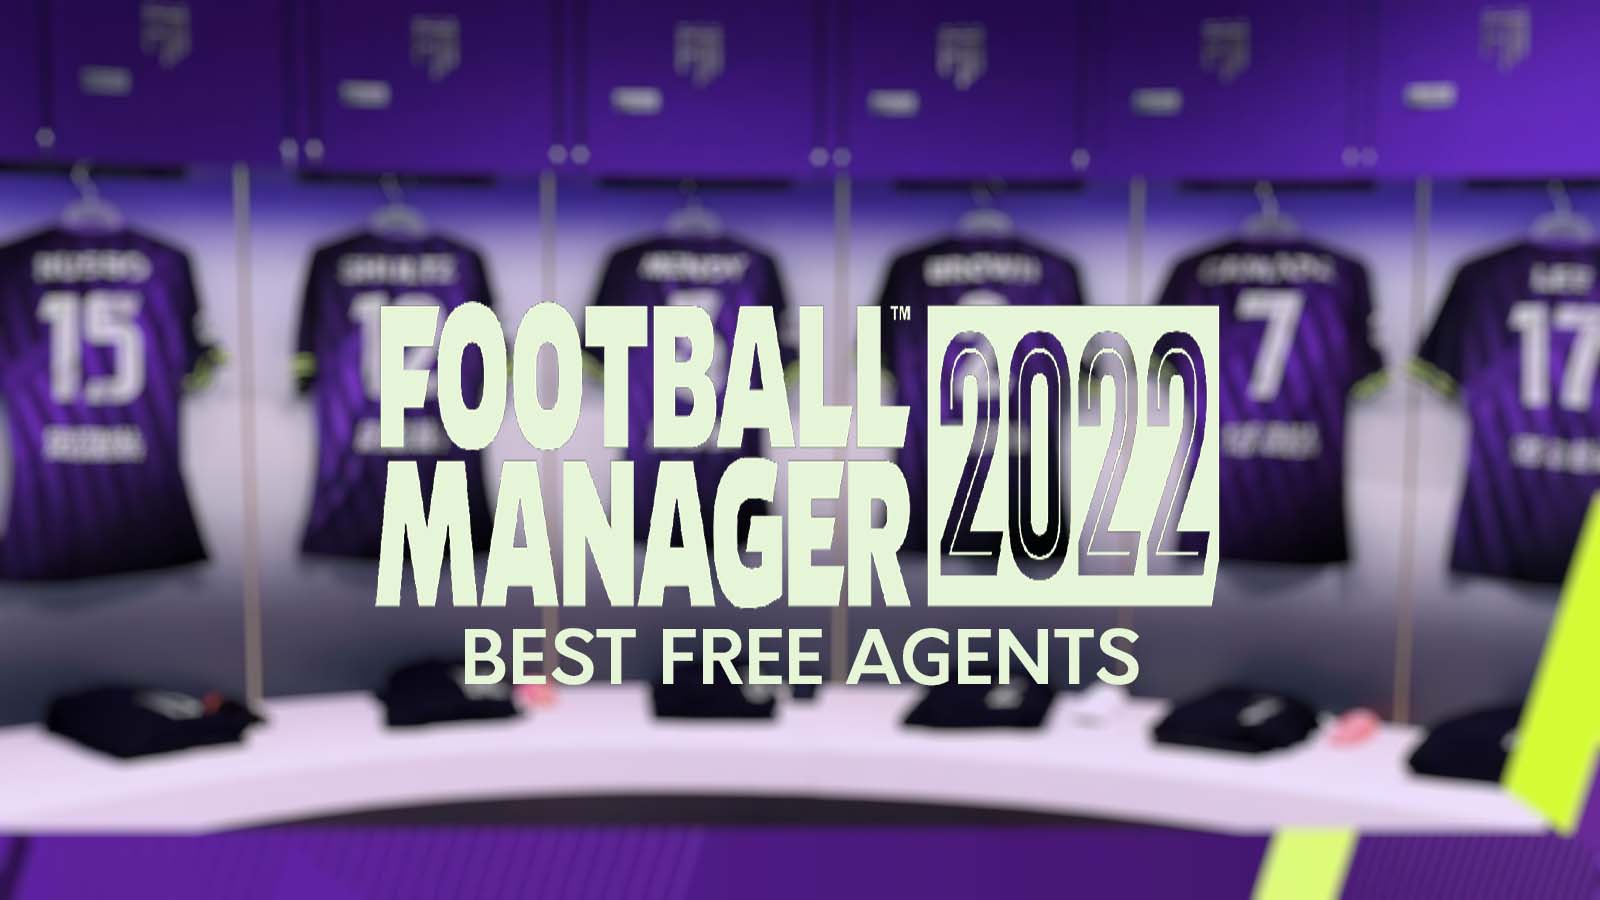 Best Free Agent Players in Football Manager 2022, FM22, FM Blog